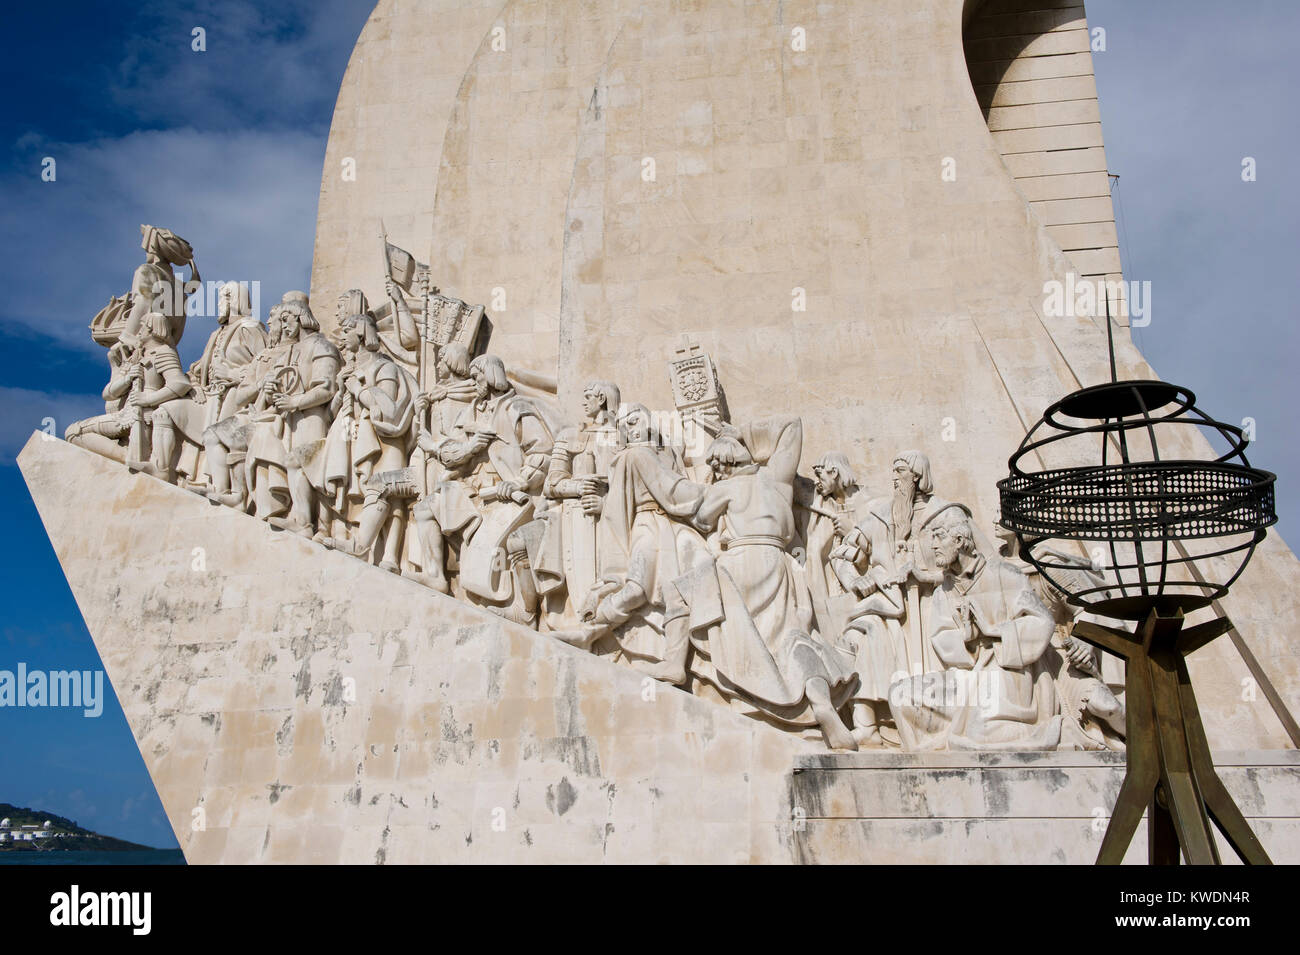 Monument to the Discoveries. It was conceived in 1939 by Portuguese architect José Ângelo Cottinelli Telmo, and sculptor Leopoldo de Almeida. Stock Photo